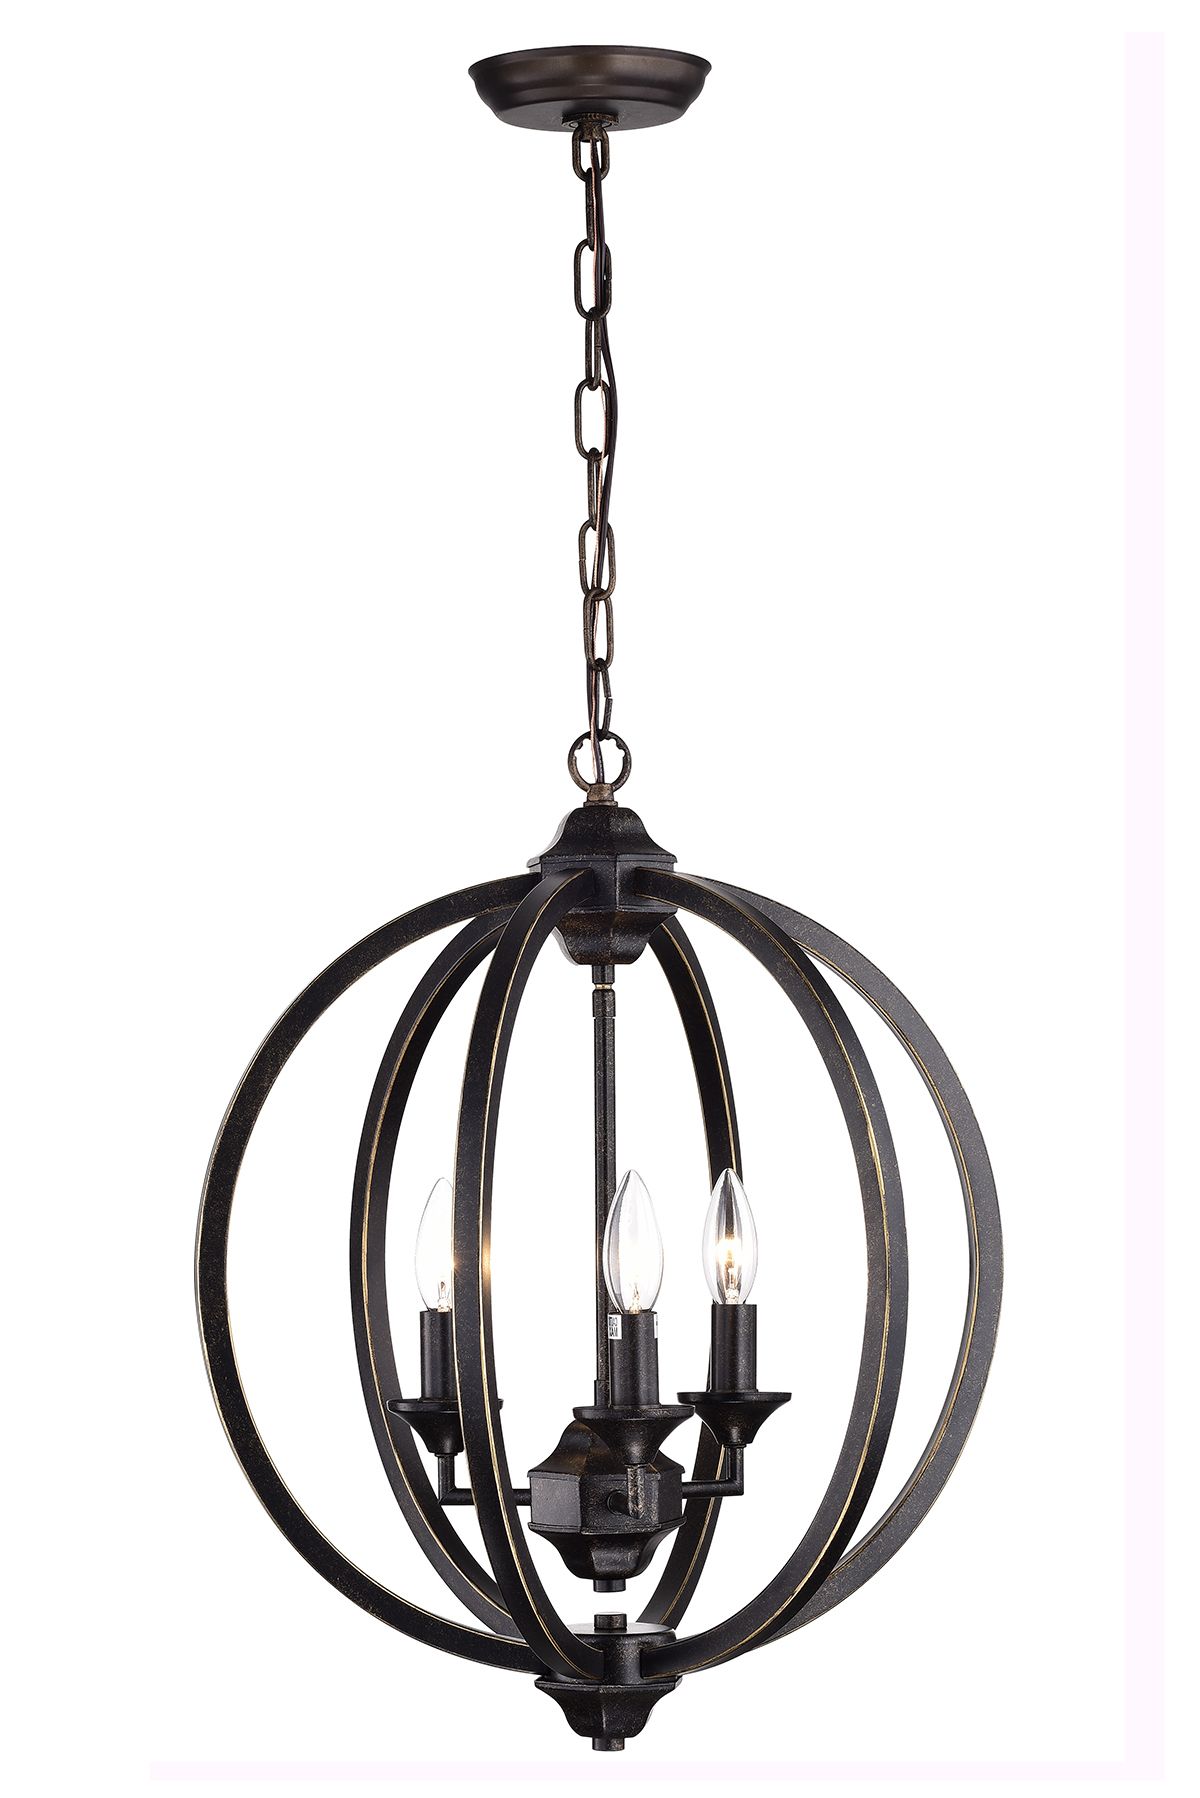 Bronze Metal Chandeliers Intended For Popular 3 Light Antique Bronze Wrought Iron Globe Sphere Orb Cage (View 15 of 15)